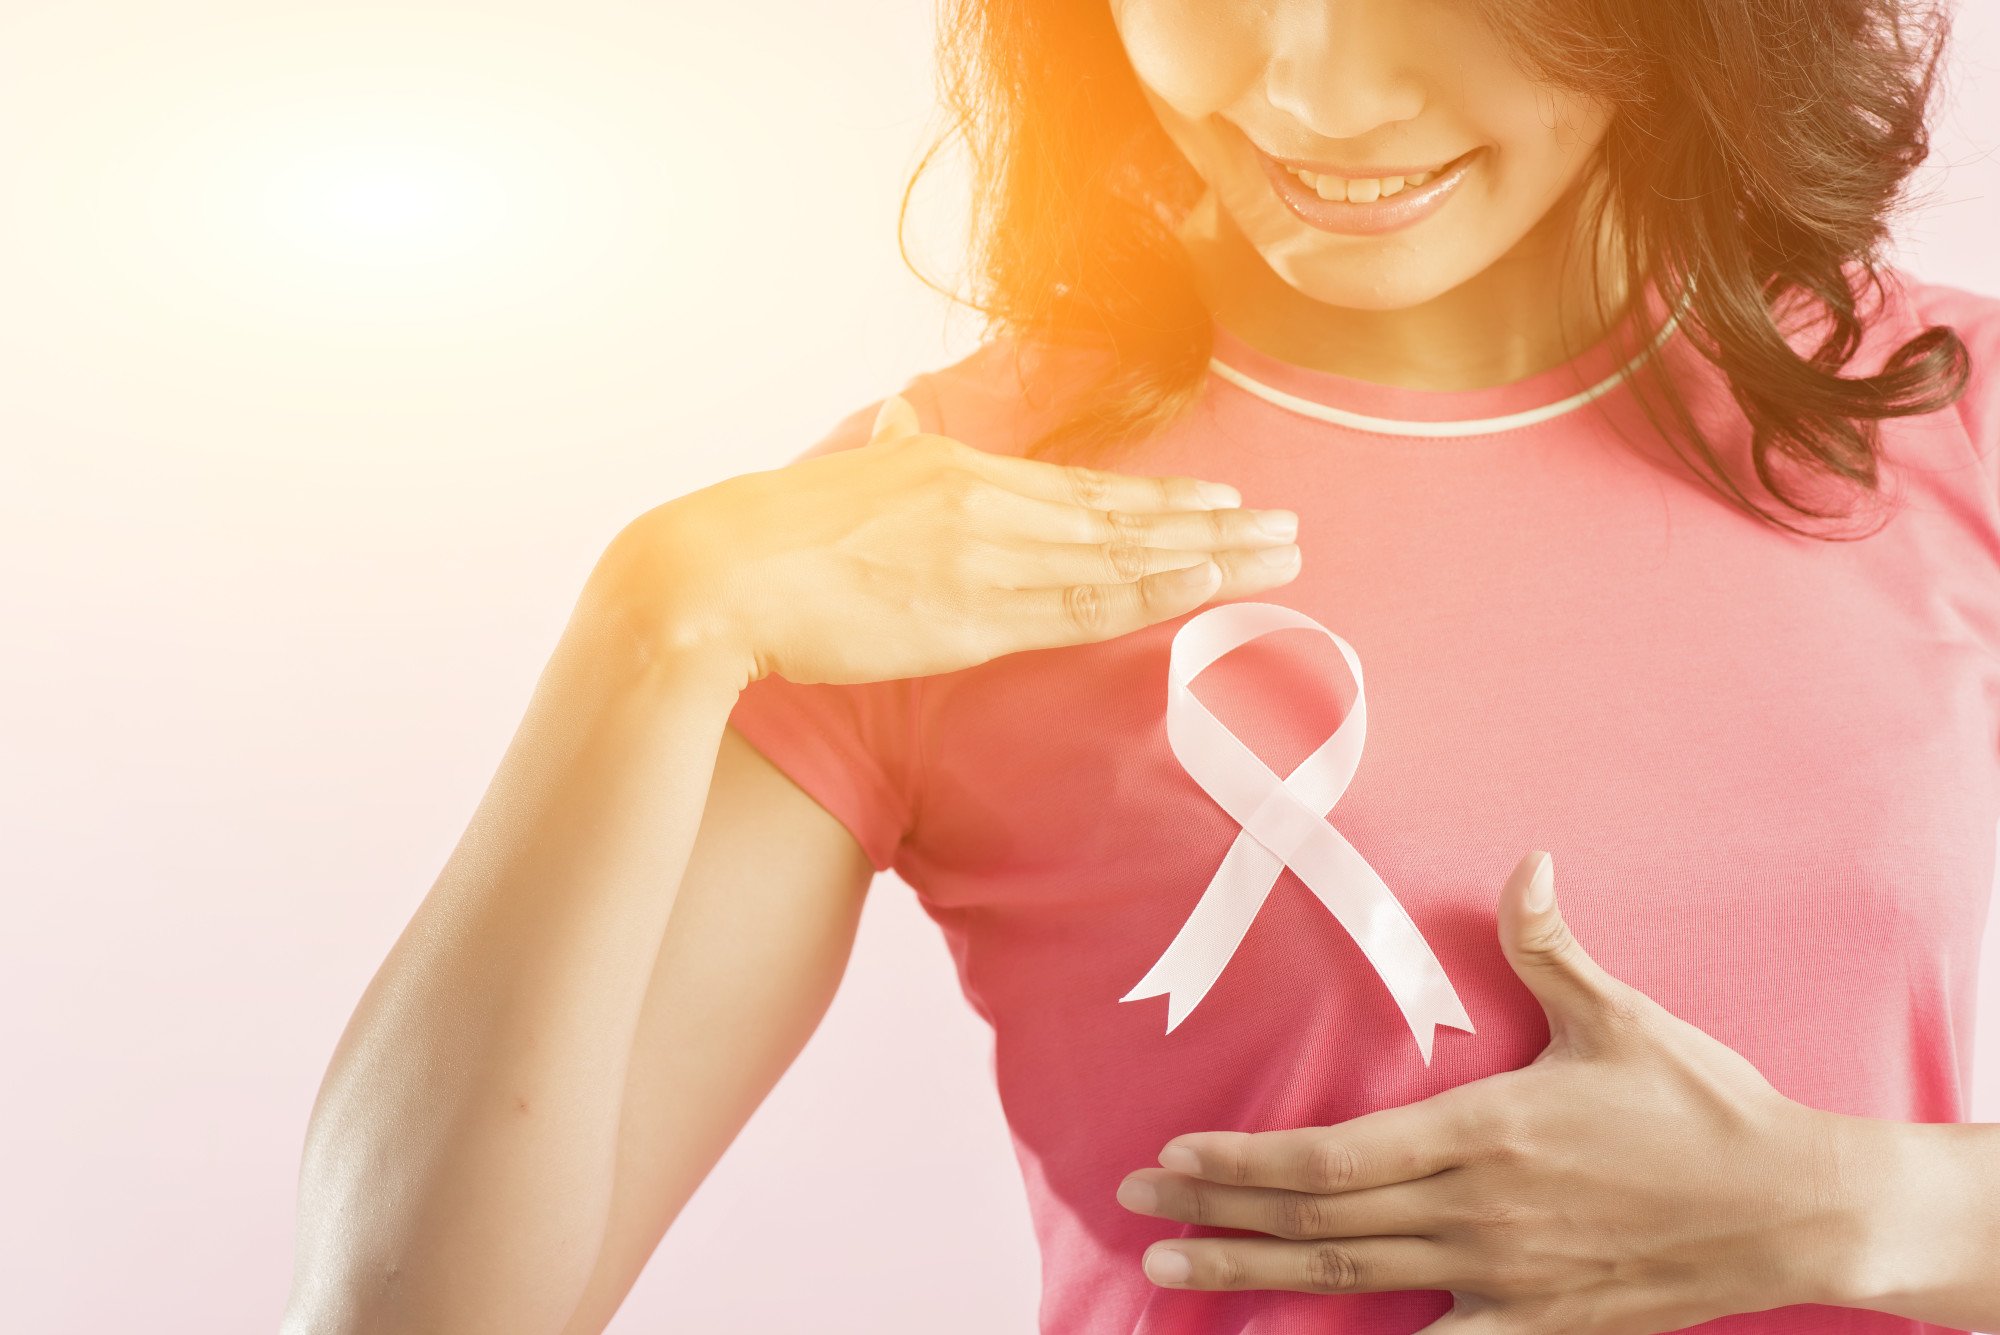 5 Questions to Ask Before Getting Breast Cancer Surgery